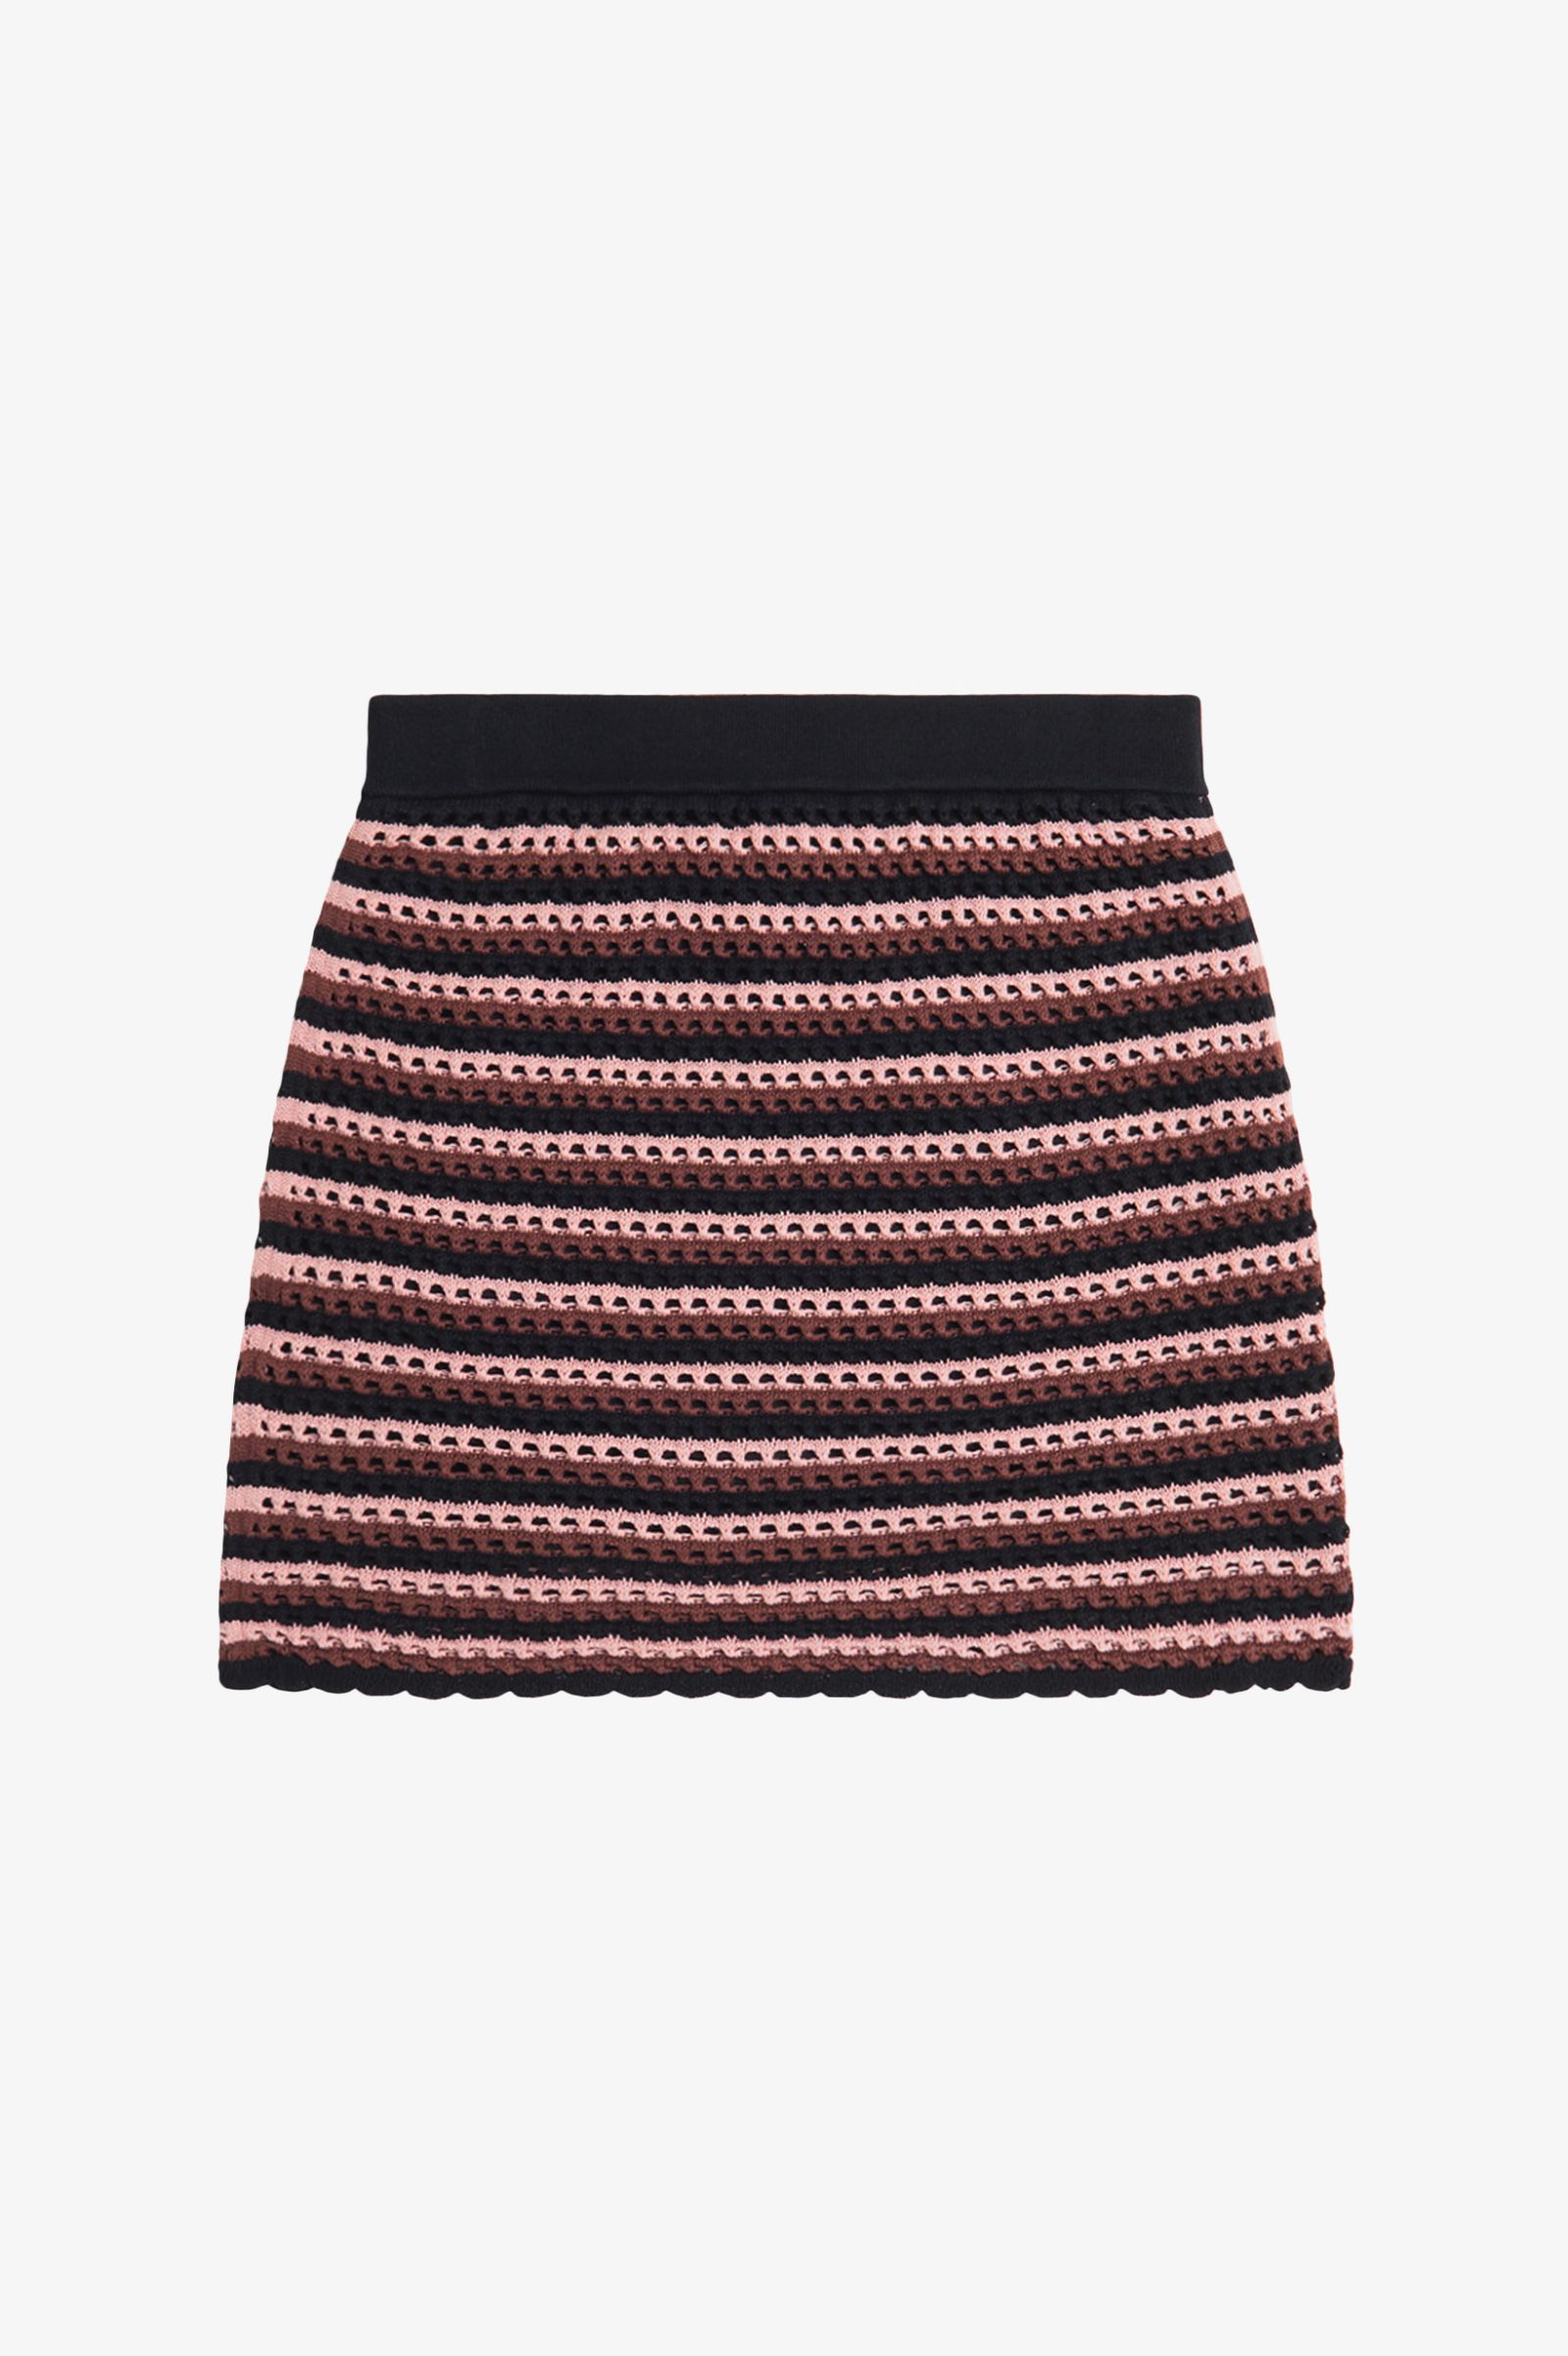 Fred Perry Open-Knit Skirt in Black